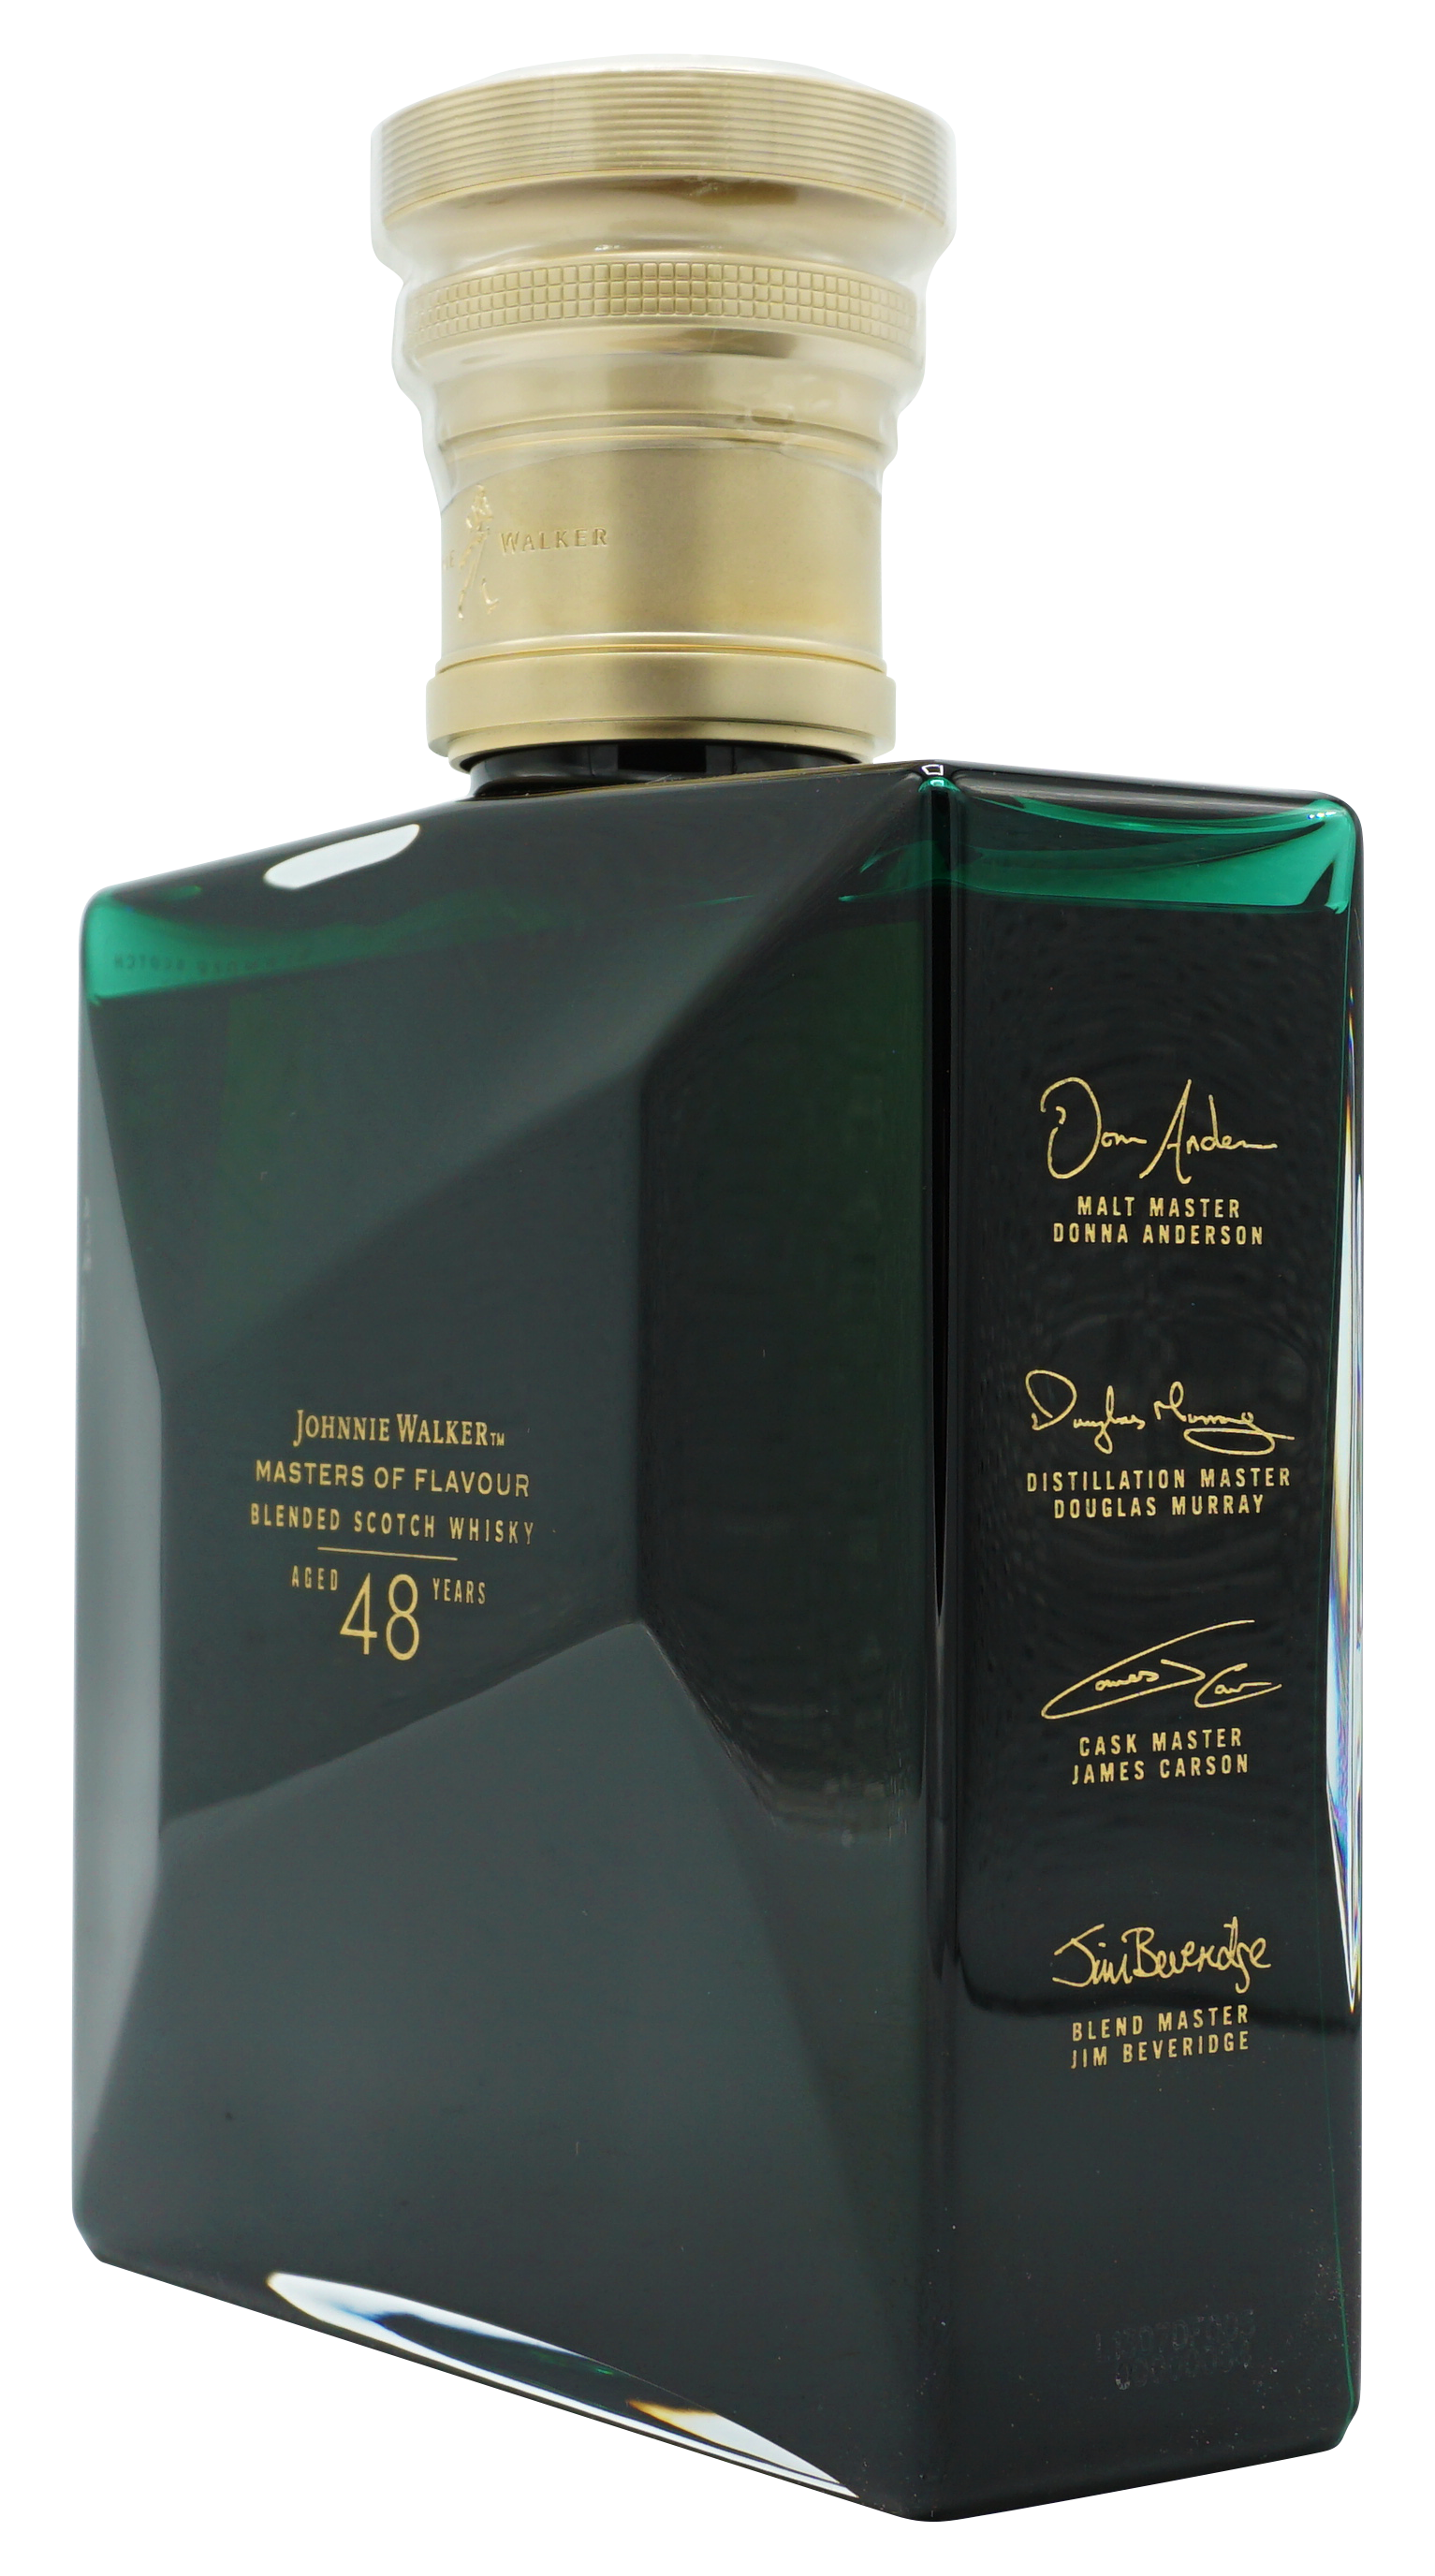 Johnnie Walker Masters Of Flavour Blend 70cl 418 2